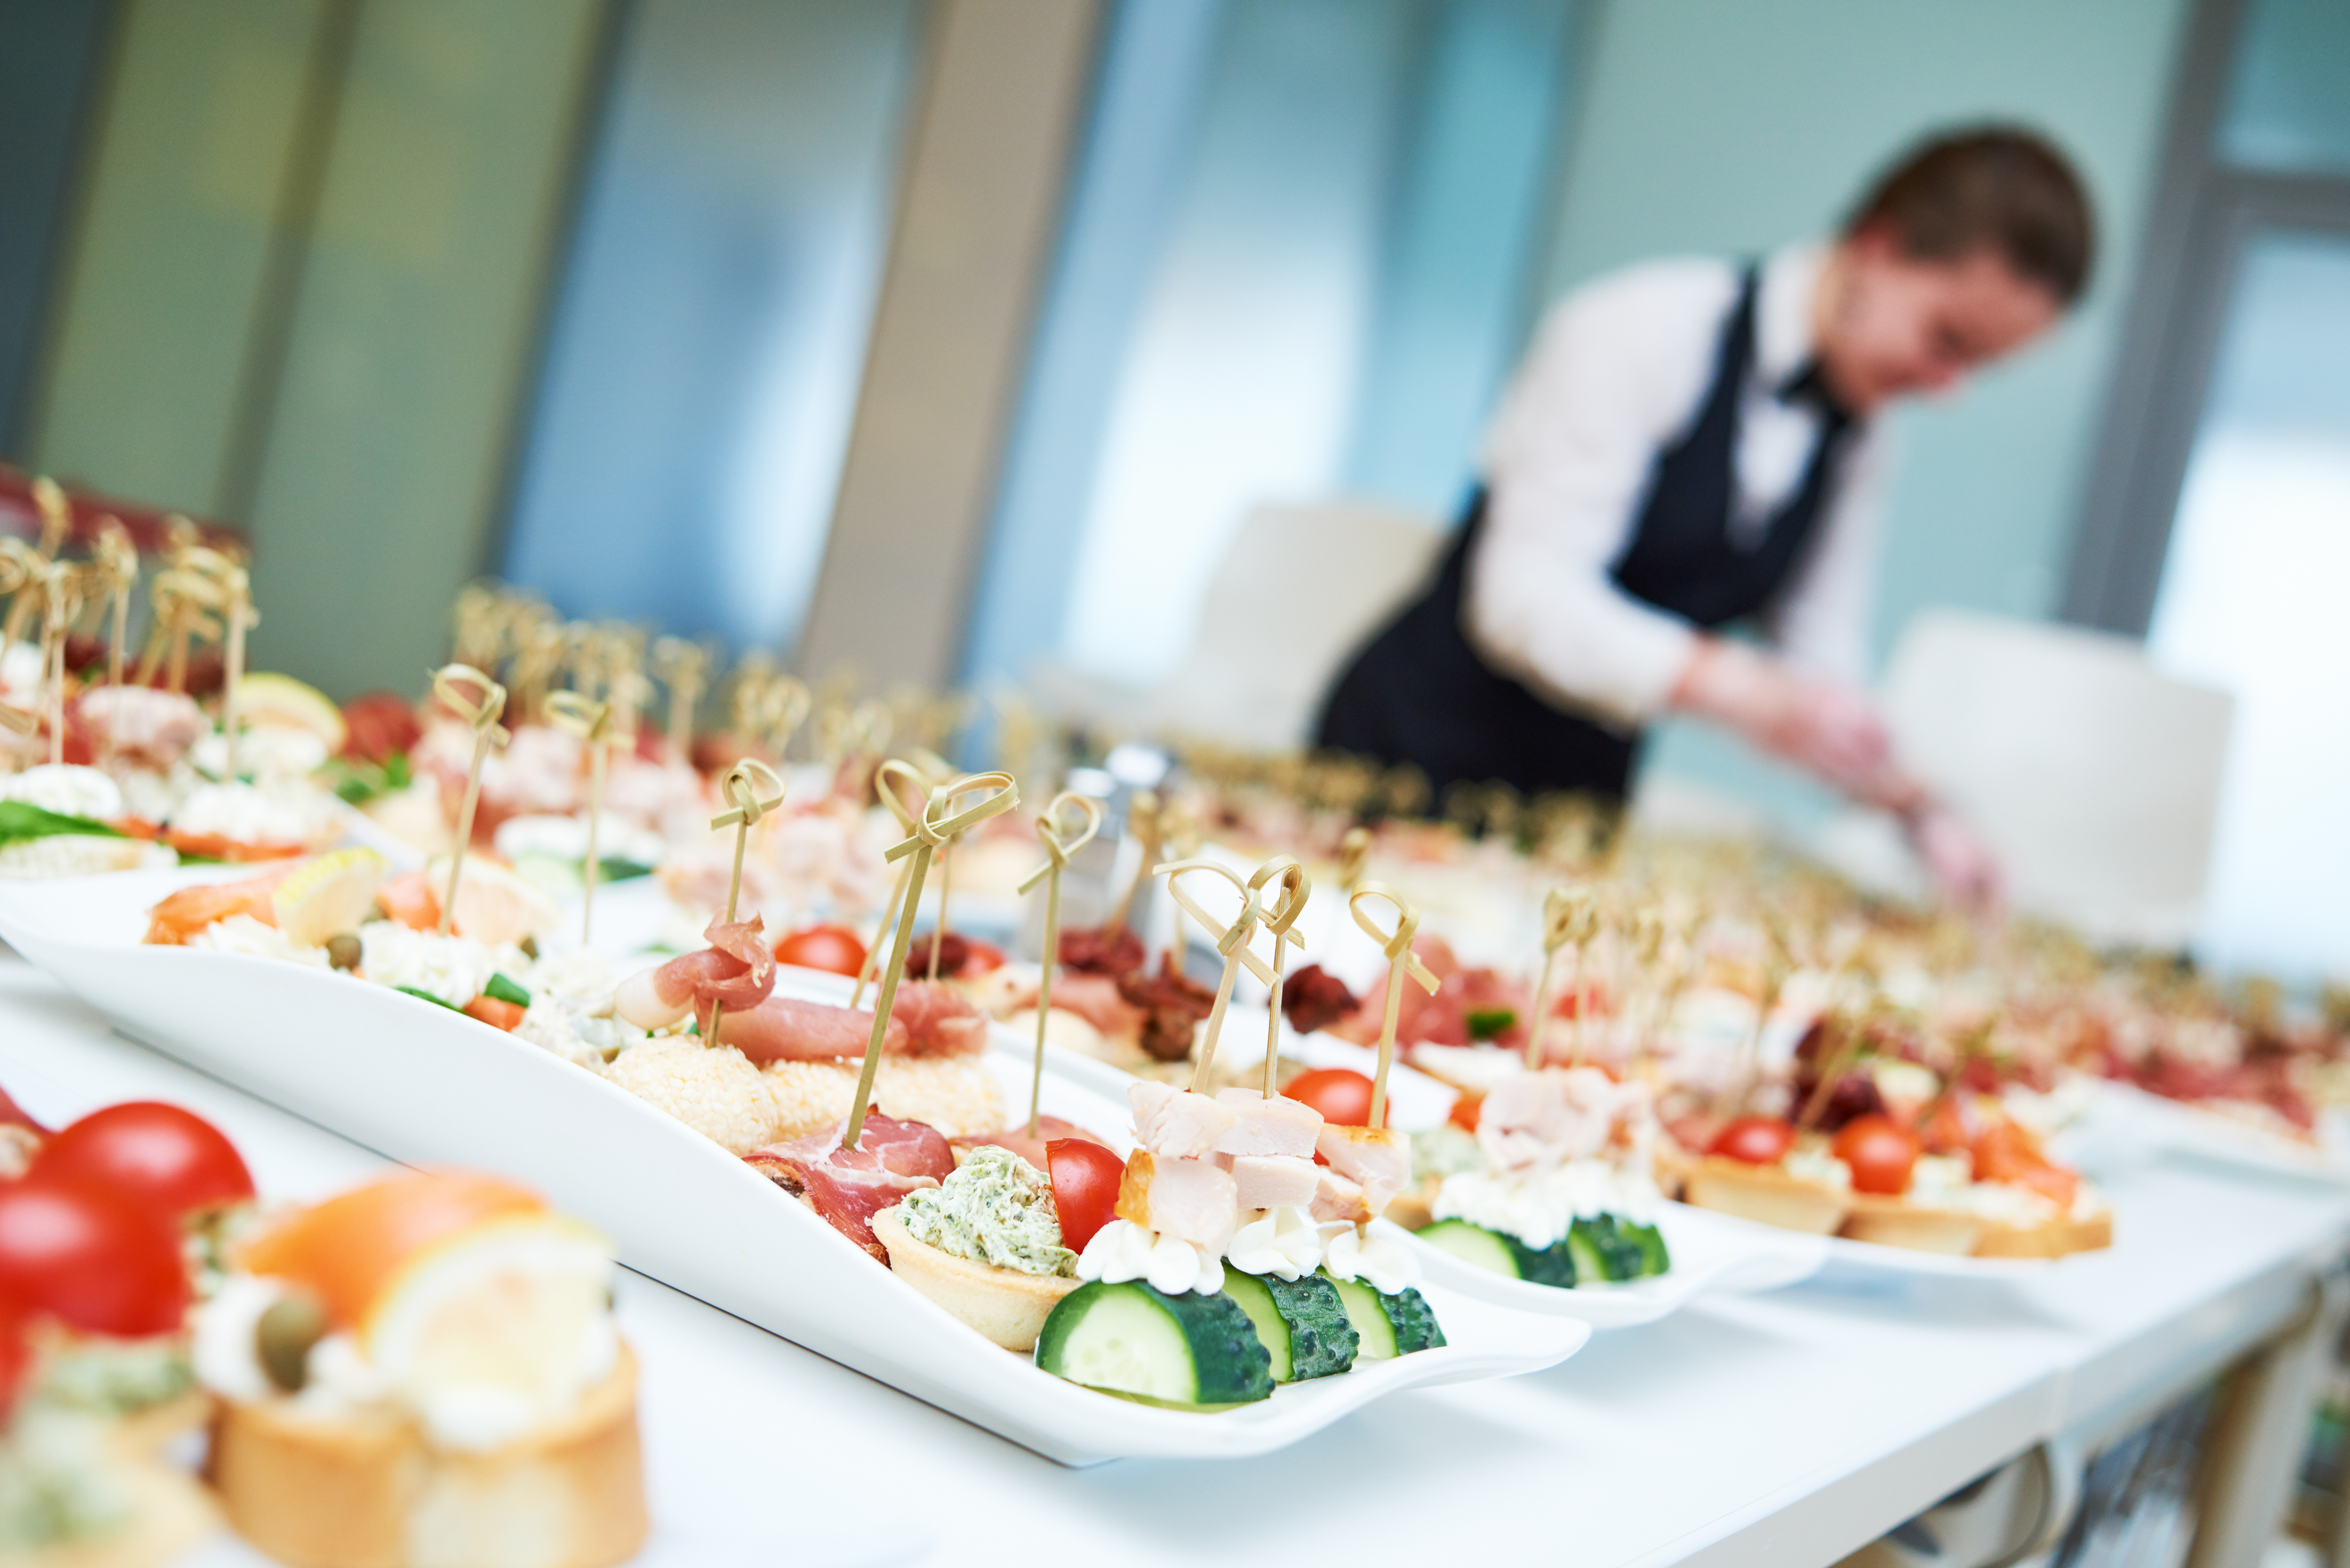 How to Hire the Perfect Caterer for Your Private Event